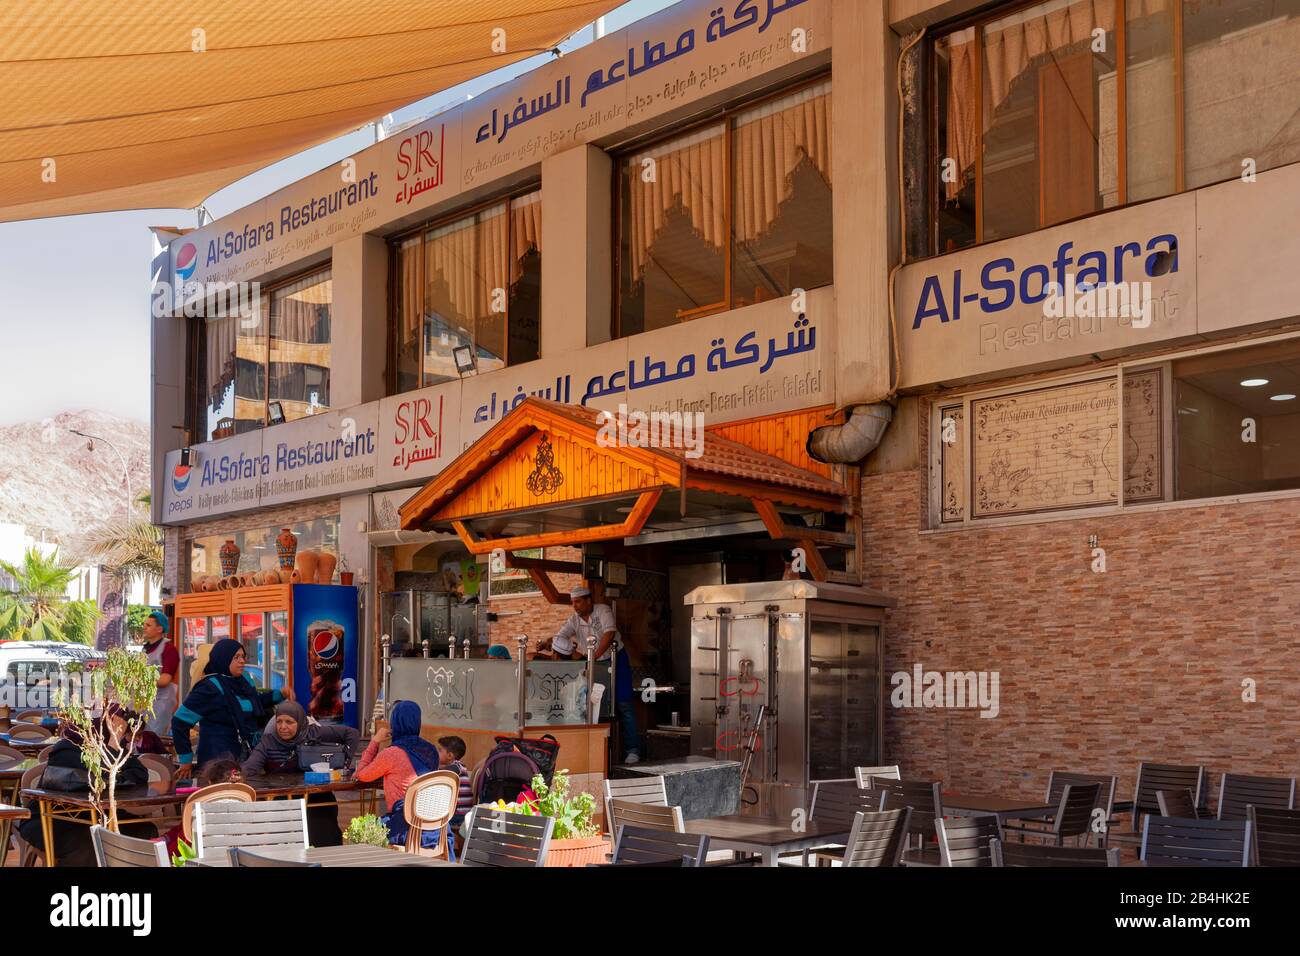 Aqaba Restaurant High Resolution Stock Photography and Images - Alamy